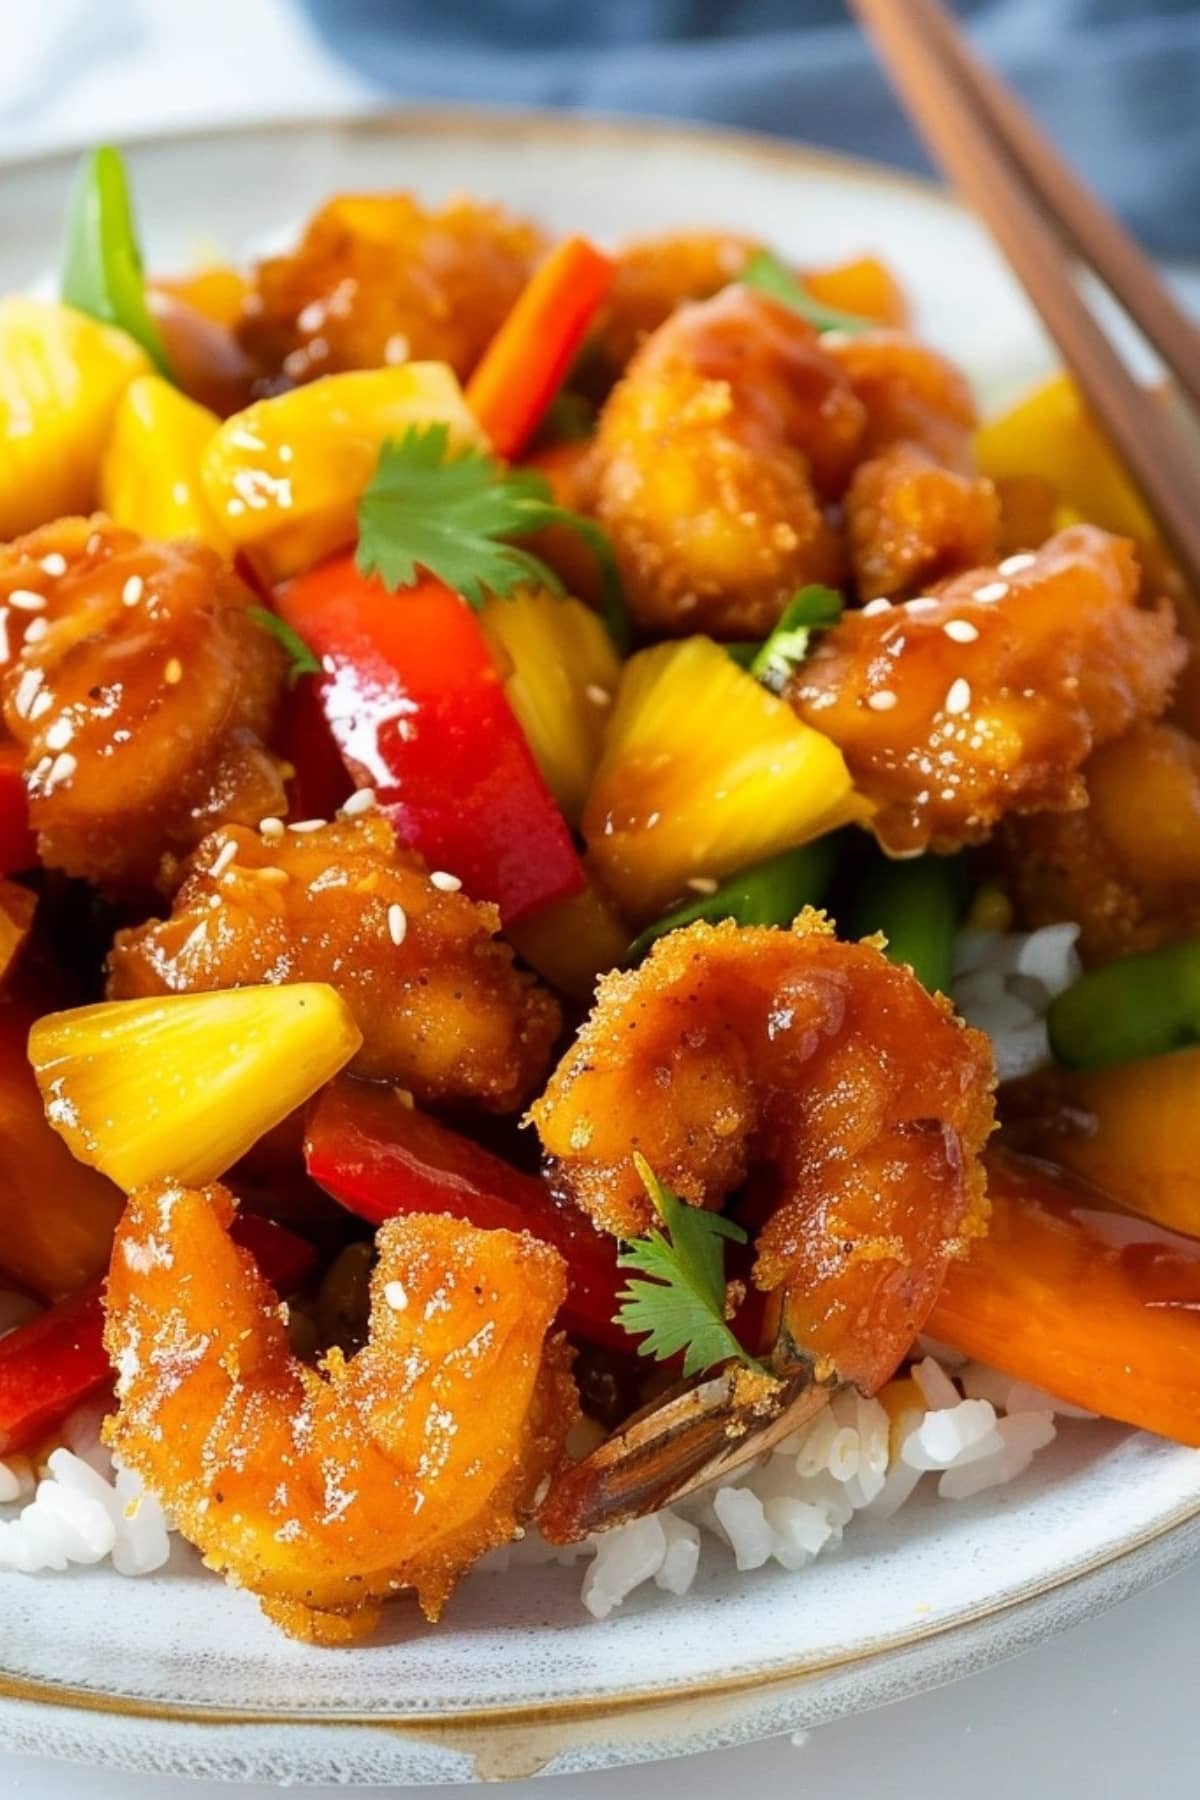 Shrimp with bell pepper, carrots, pineapple chunks and sweet and sour sauce served with rice.